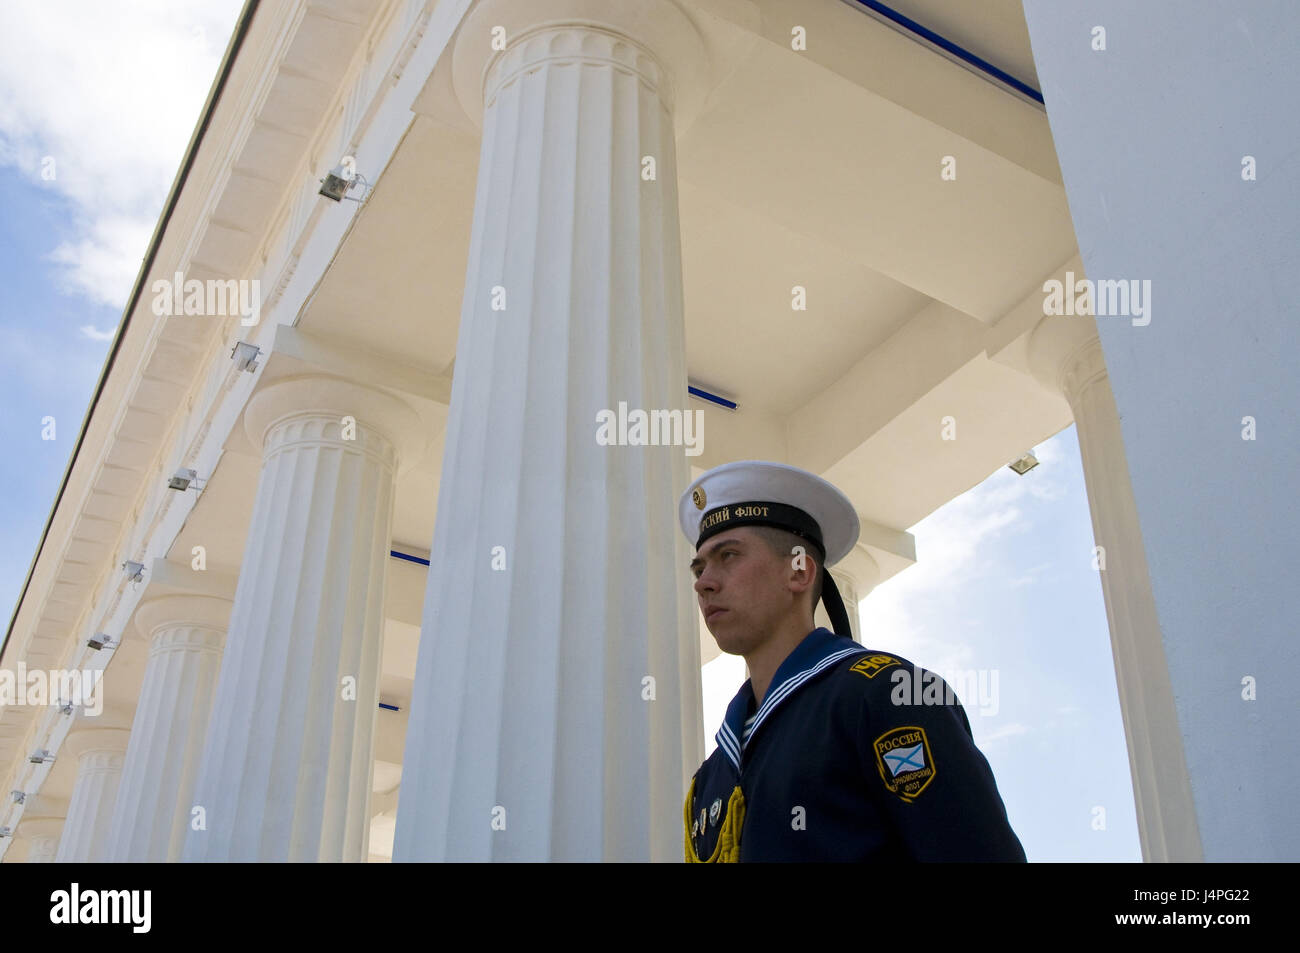 Guard of honour with the naval save of the Russian Black Sea fleet in Sevastopol, no model release, Stock Photo